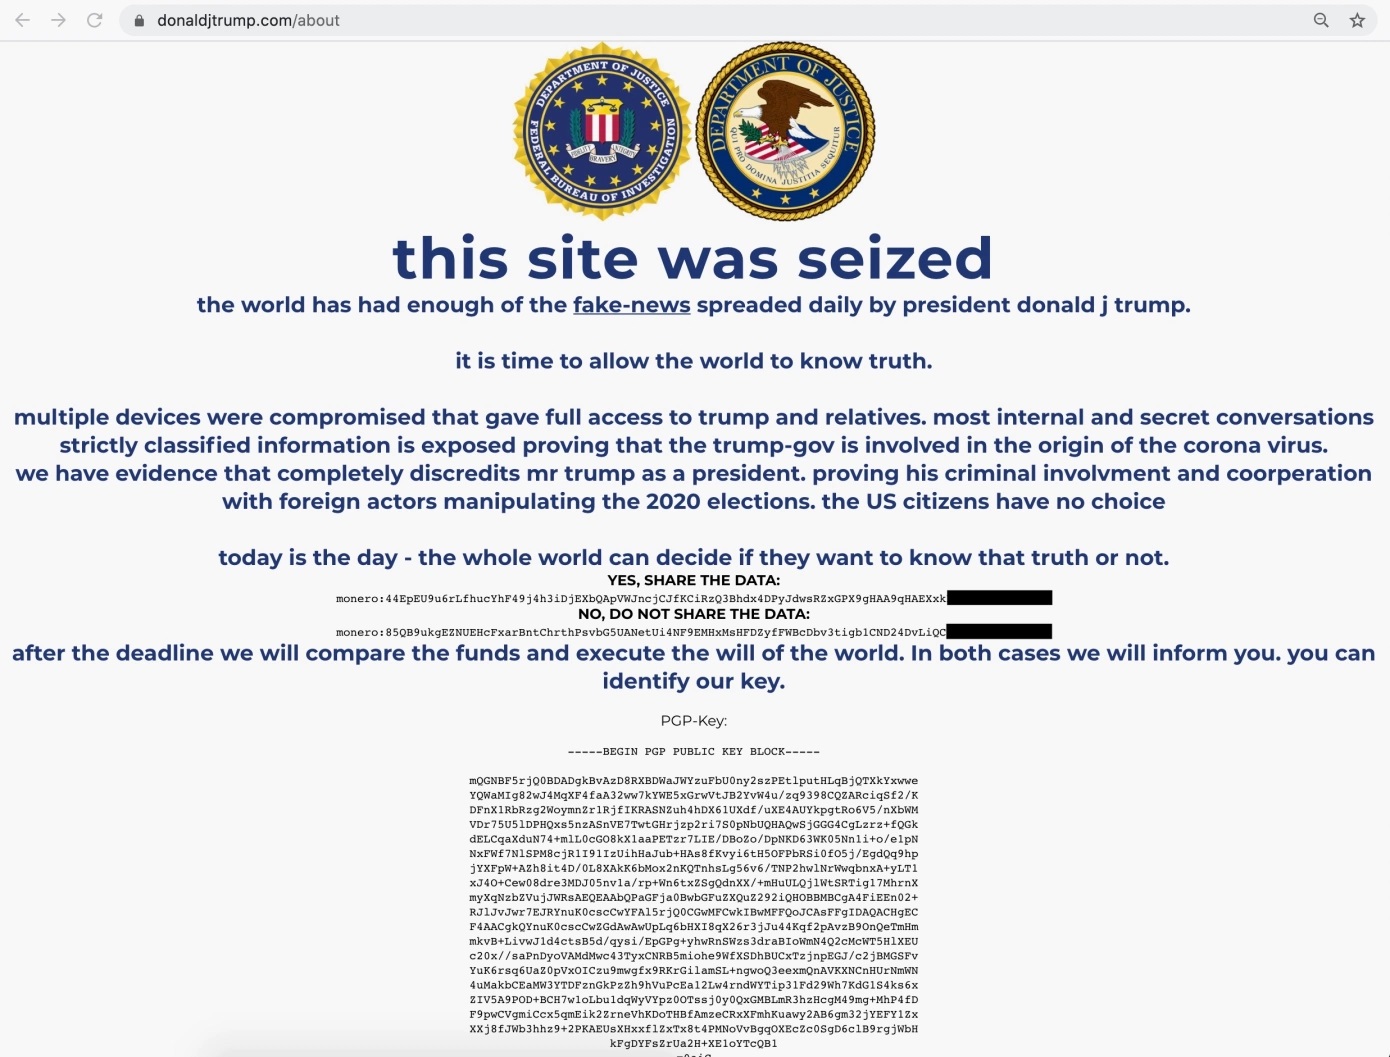 Trump's Website Hacked, Scam Asked Crypto Owners to Decide Fate of 'Classified Information'